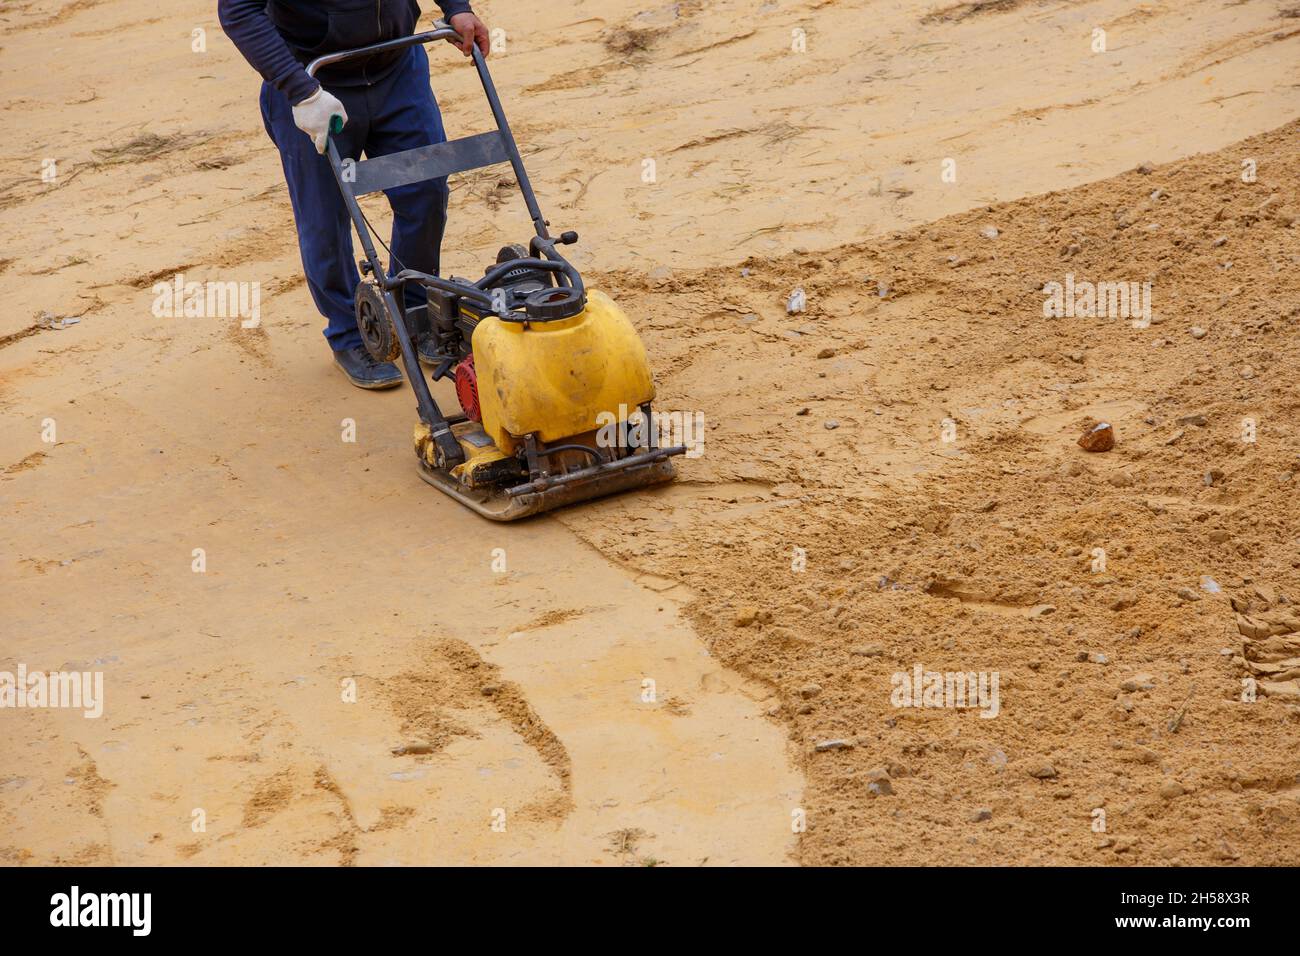 Worker in use vibratory plate compactor for compaction sand during path  construction Stock Photo - Alamy